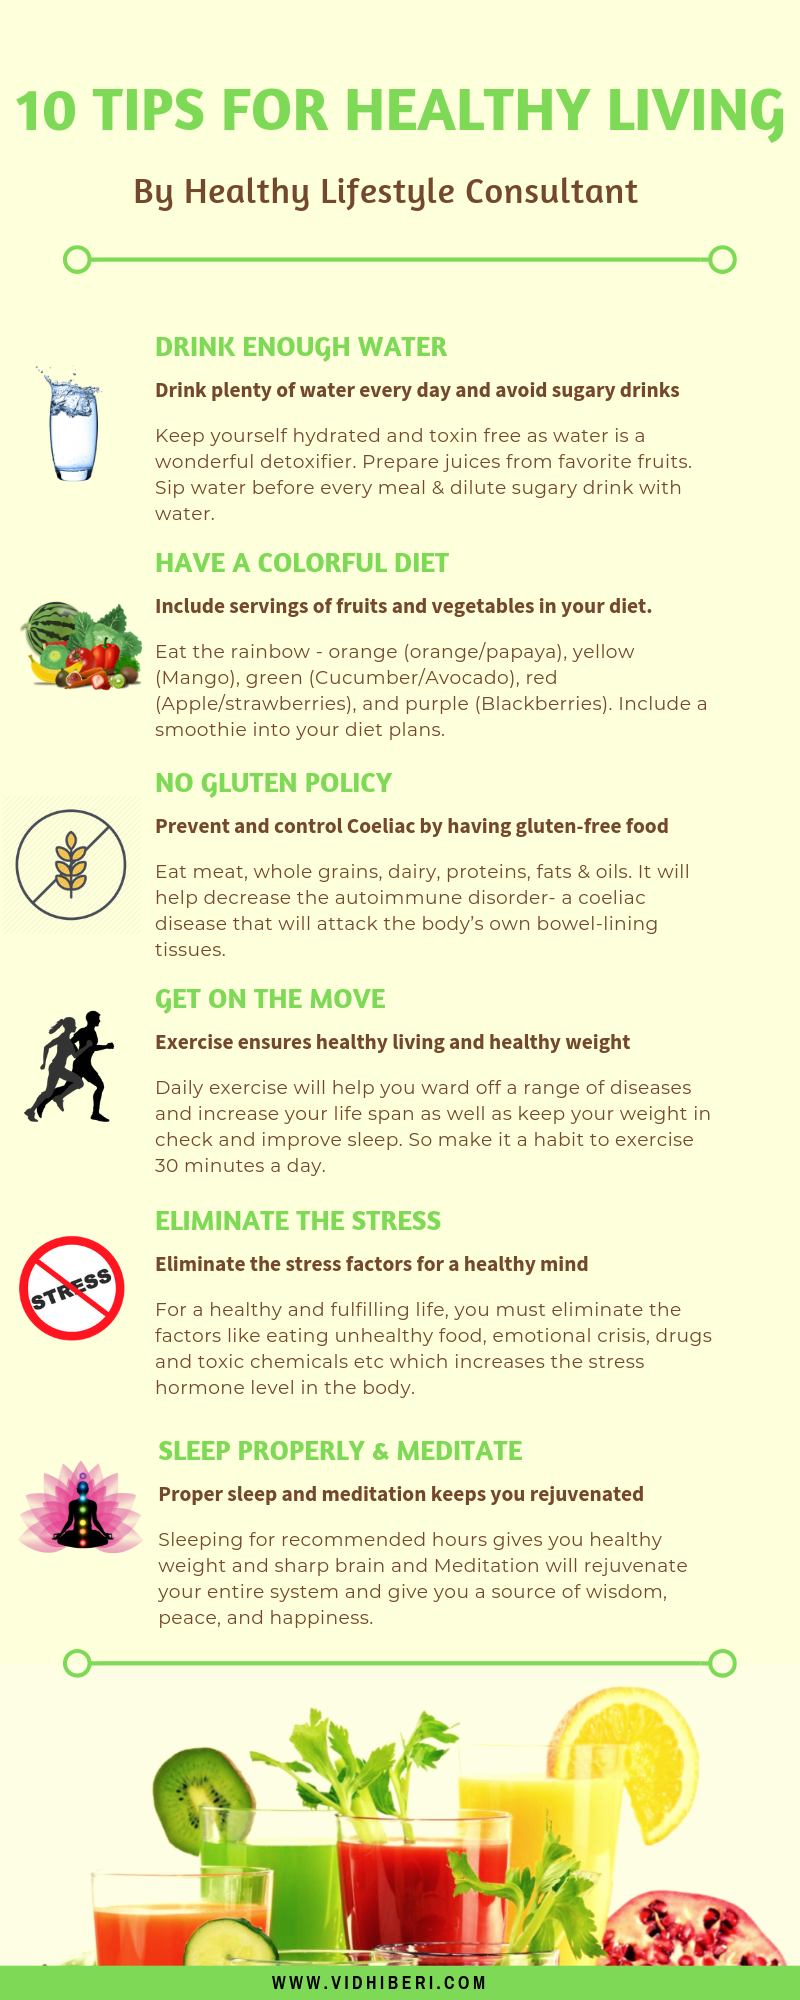 10 Tips for Healthy Living - Healthy Lifestyle Consultant